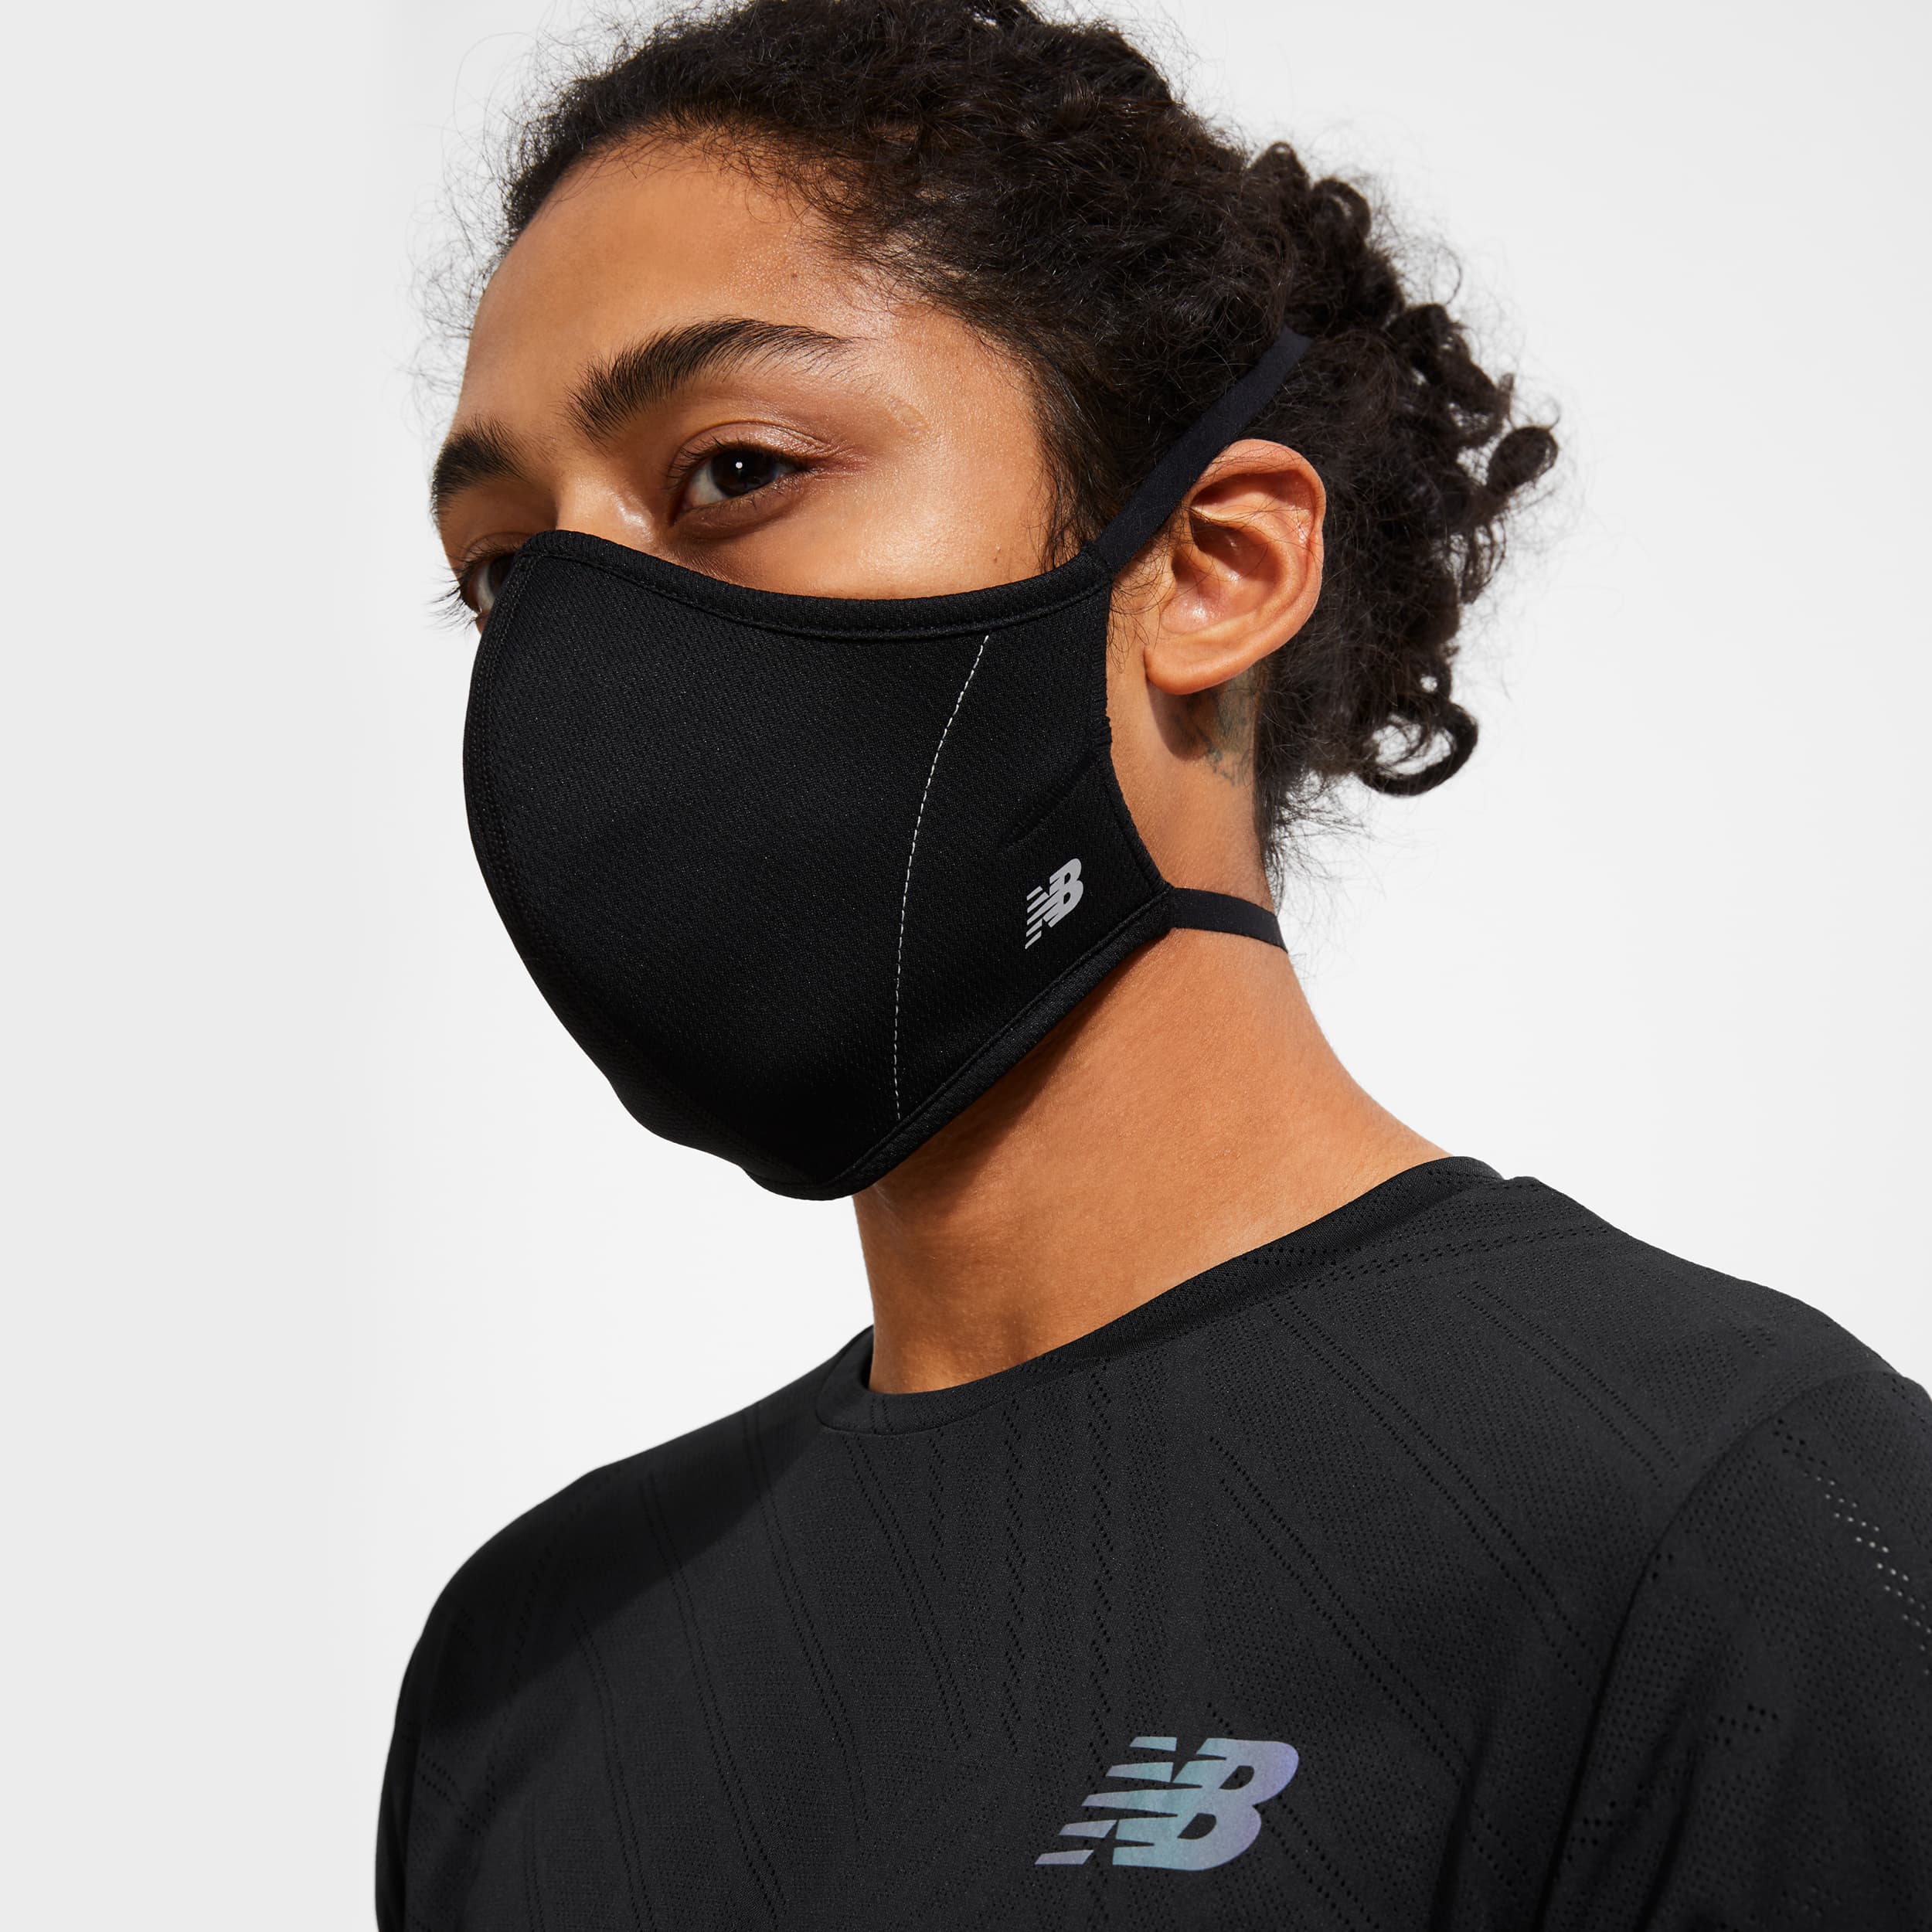 New balance releases a new performance mask